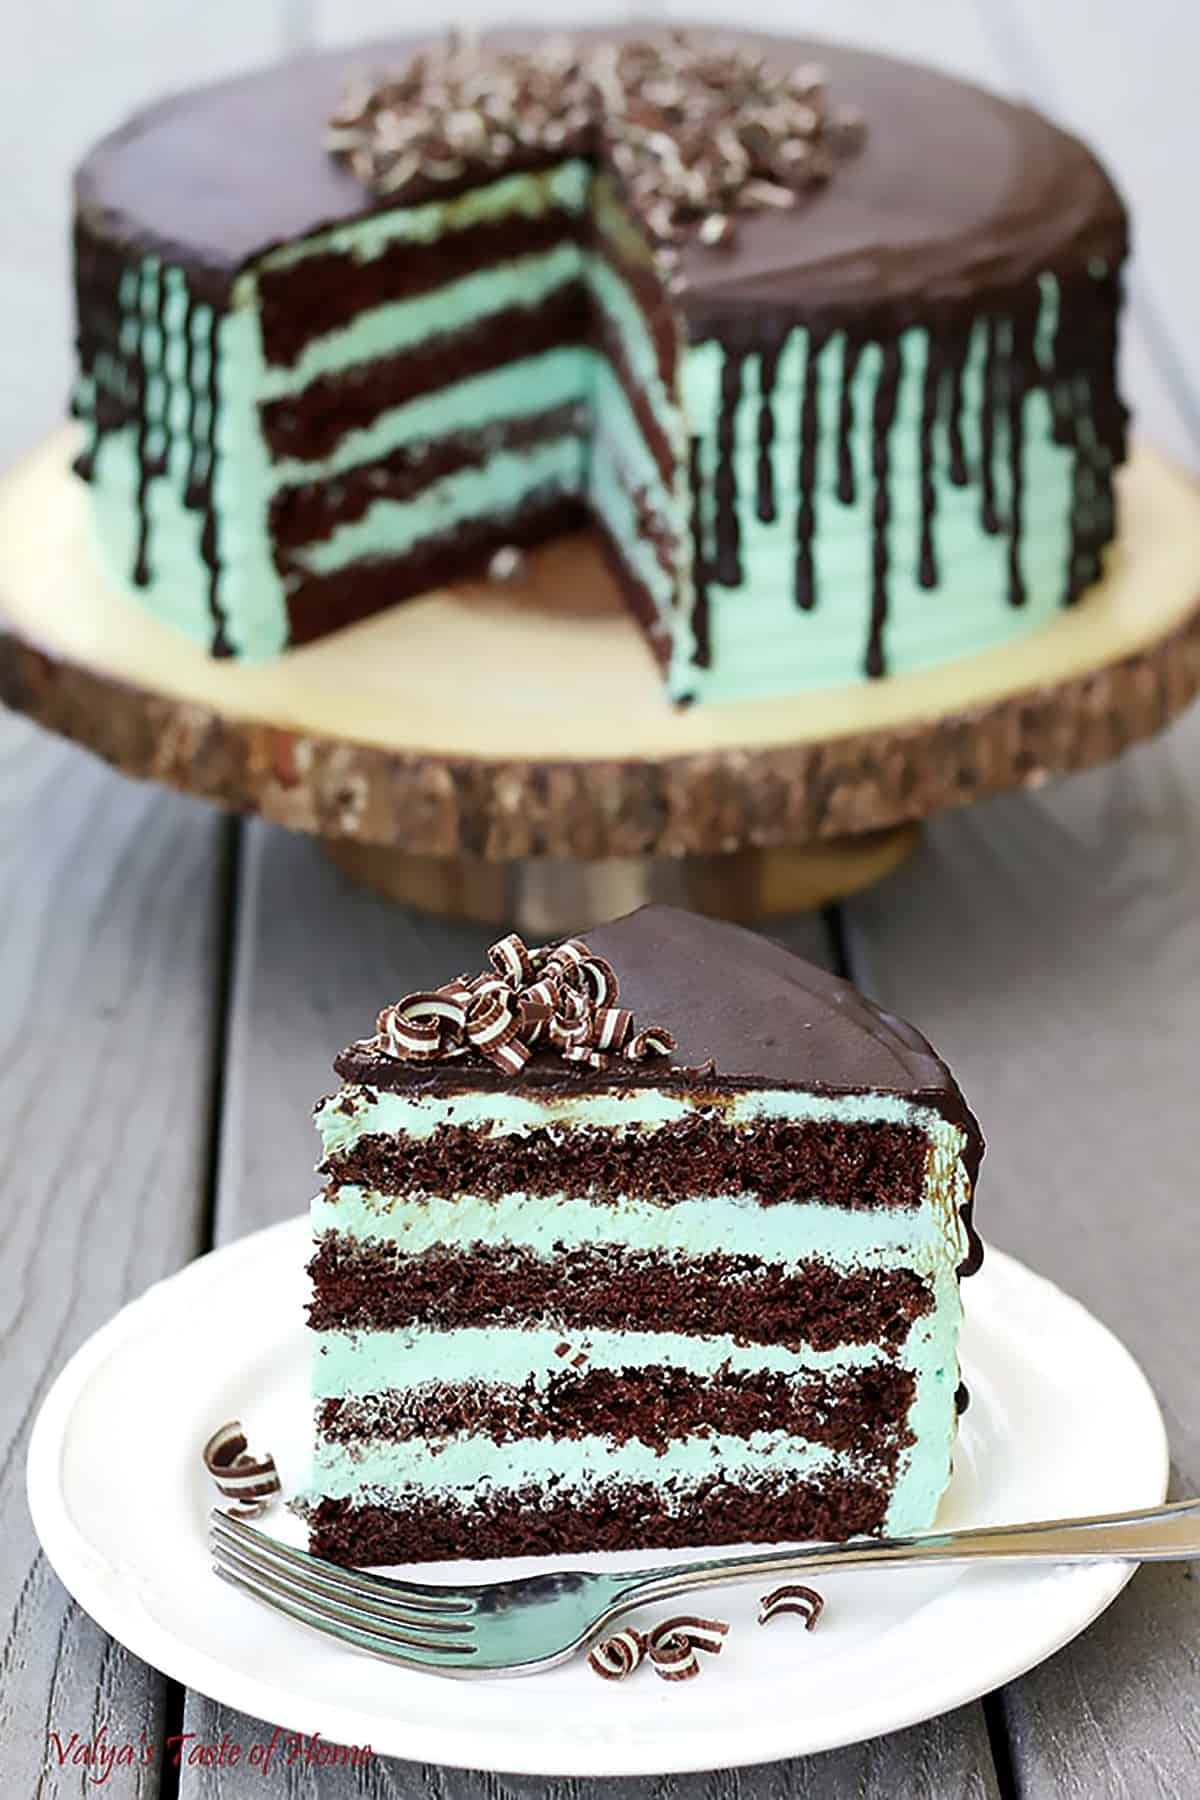 This Mint Chocolate Cake has the perfect balance of chocolate and mint for the most delicious and perfect cake you’ve ever had! It’s layered with the perfect chocolate sponge cake that’s filled with the mint frosting of your dreams!